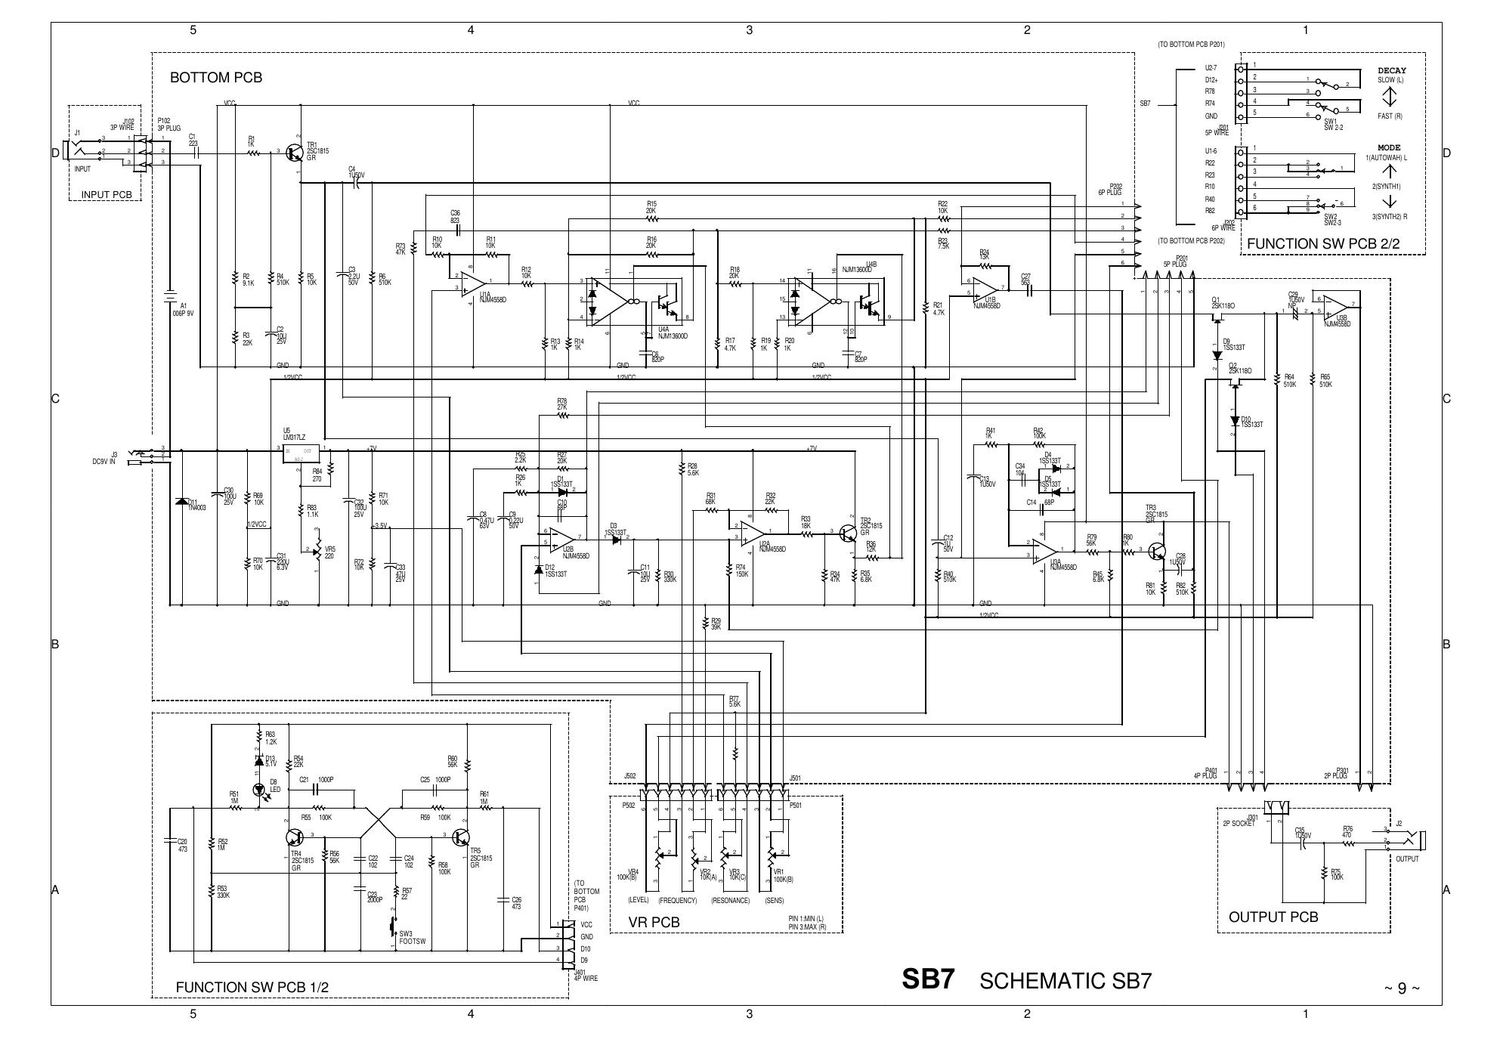 Ibanez SB 7 Bass Synthesizer Schematic